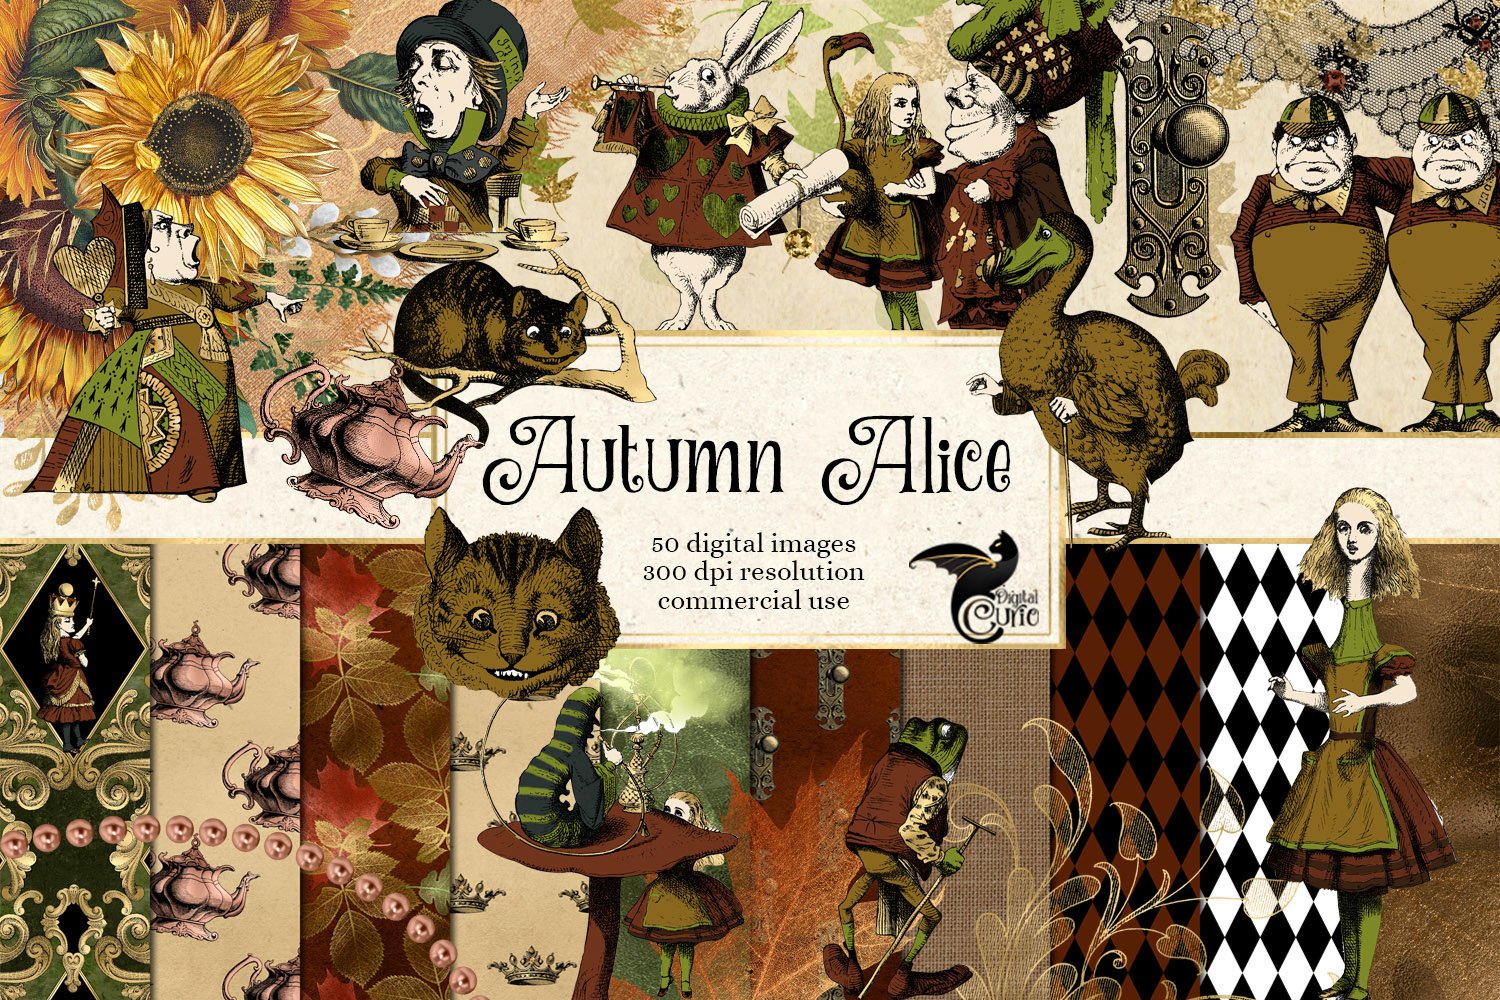 The title page of the Alice-themed package.